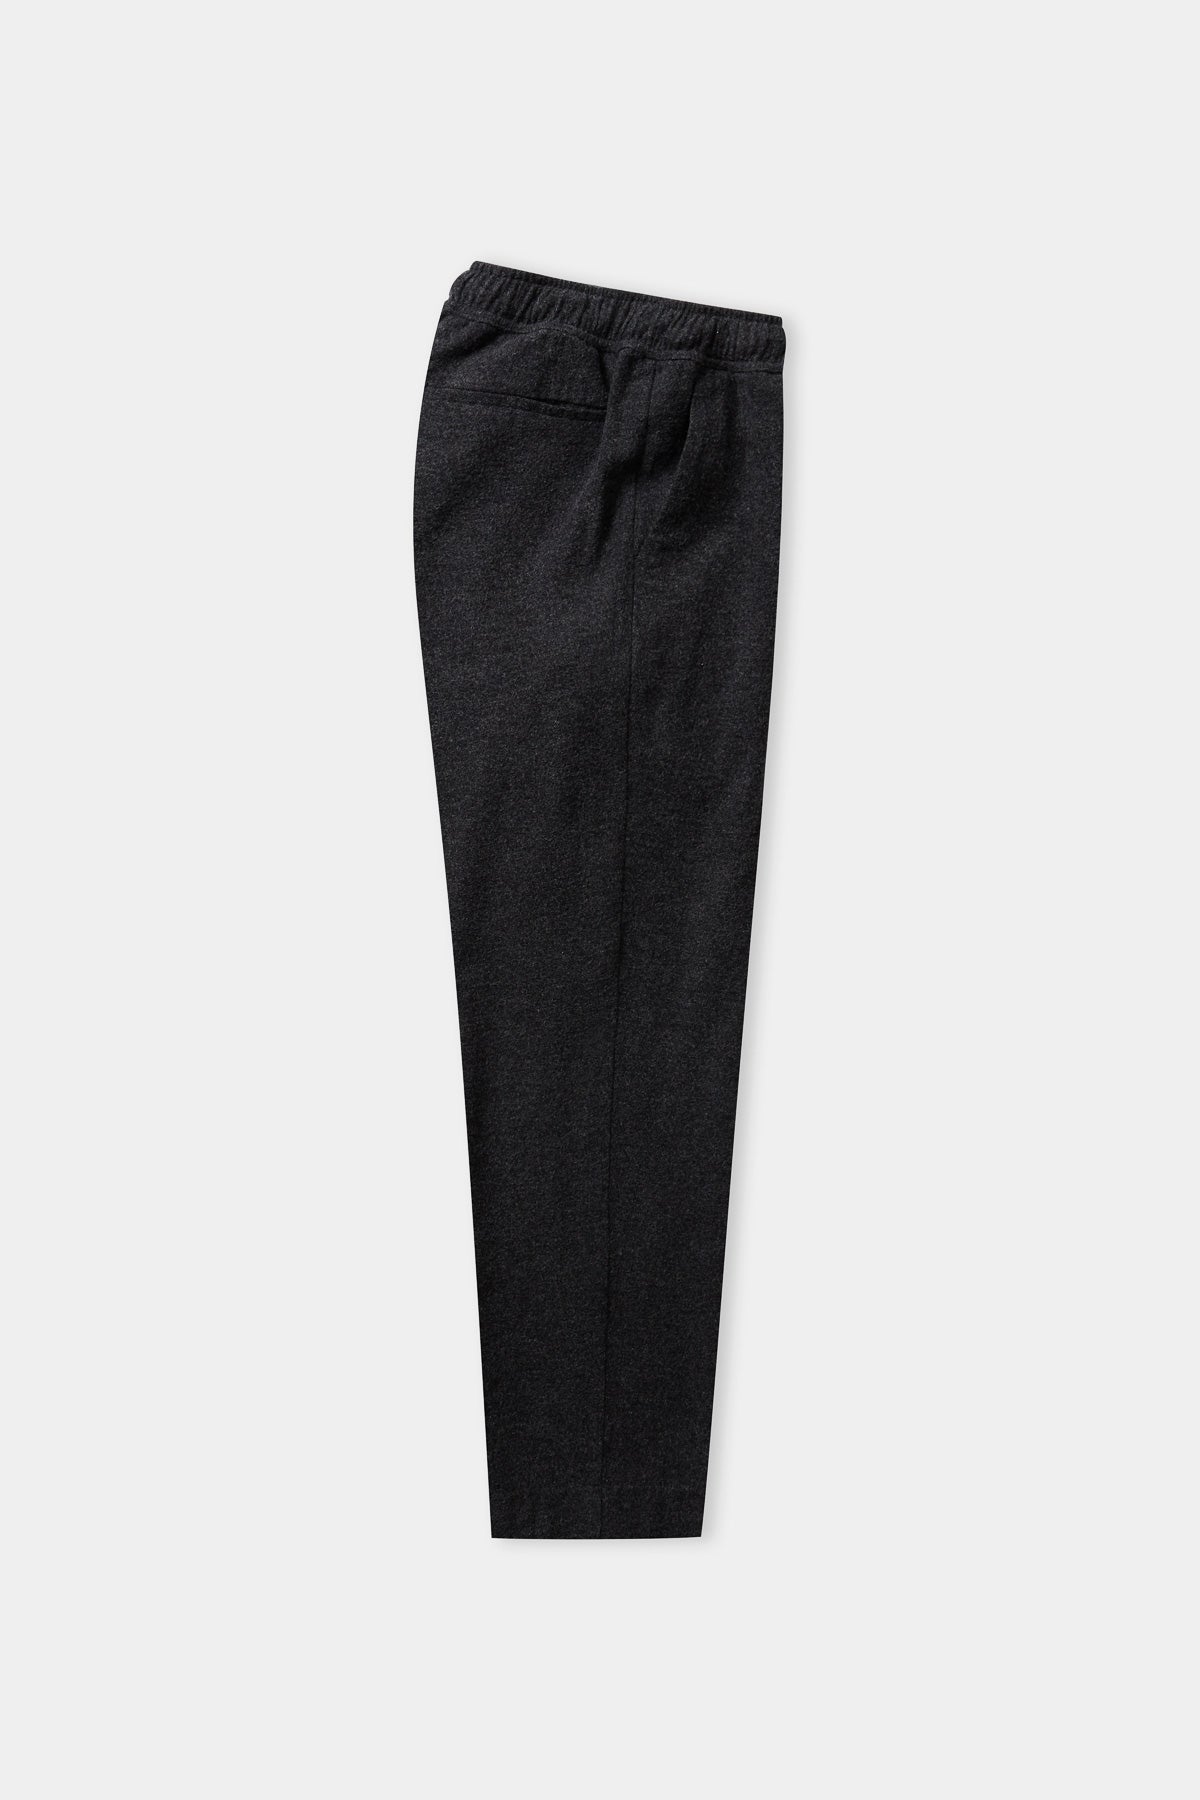 MAX trousers eco coal flannel